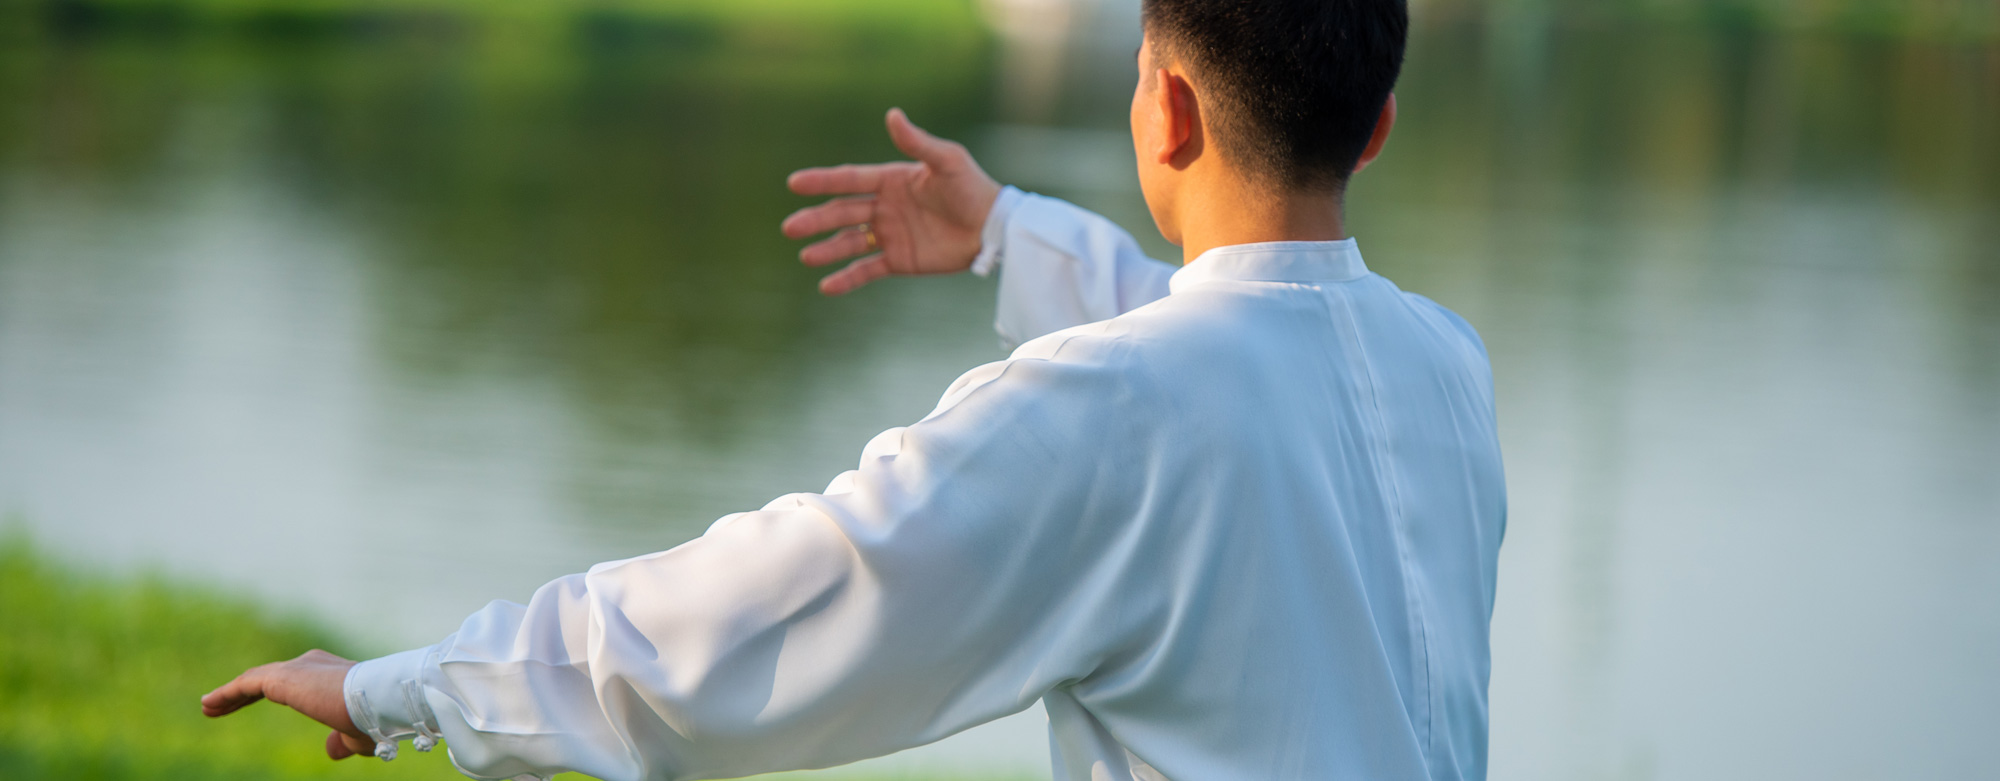 Man Practicing Tai Chi - Holistic Health through One Movement at a Time